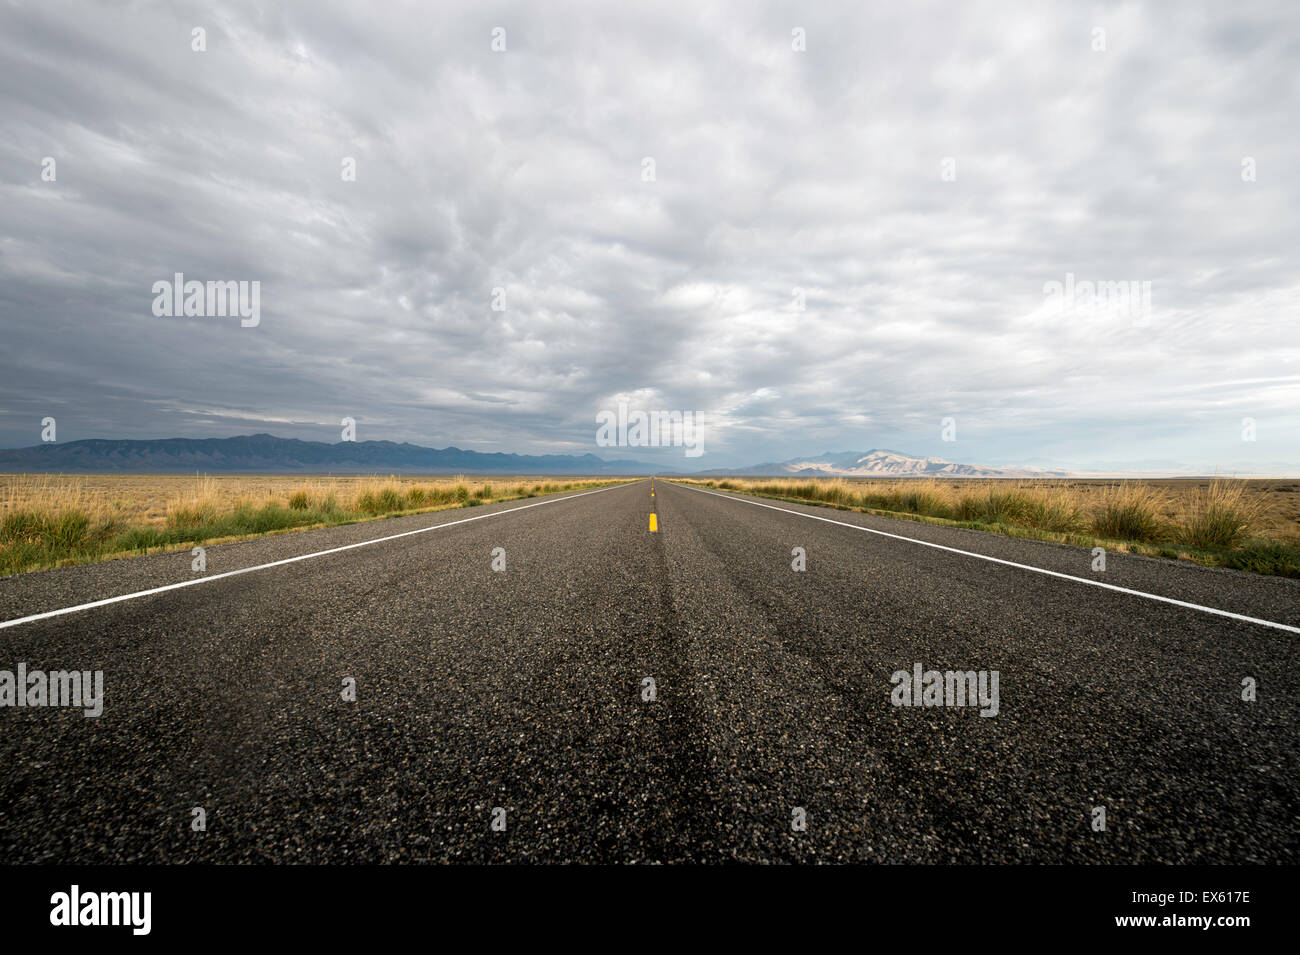 Empty open road with cloudy sky photographed from a low angle with a wide lens Stock Photo